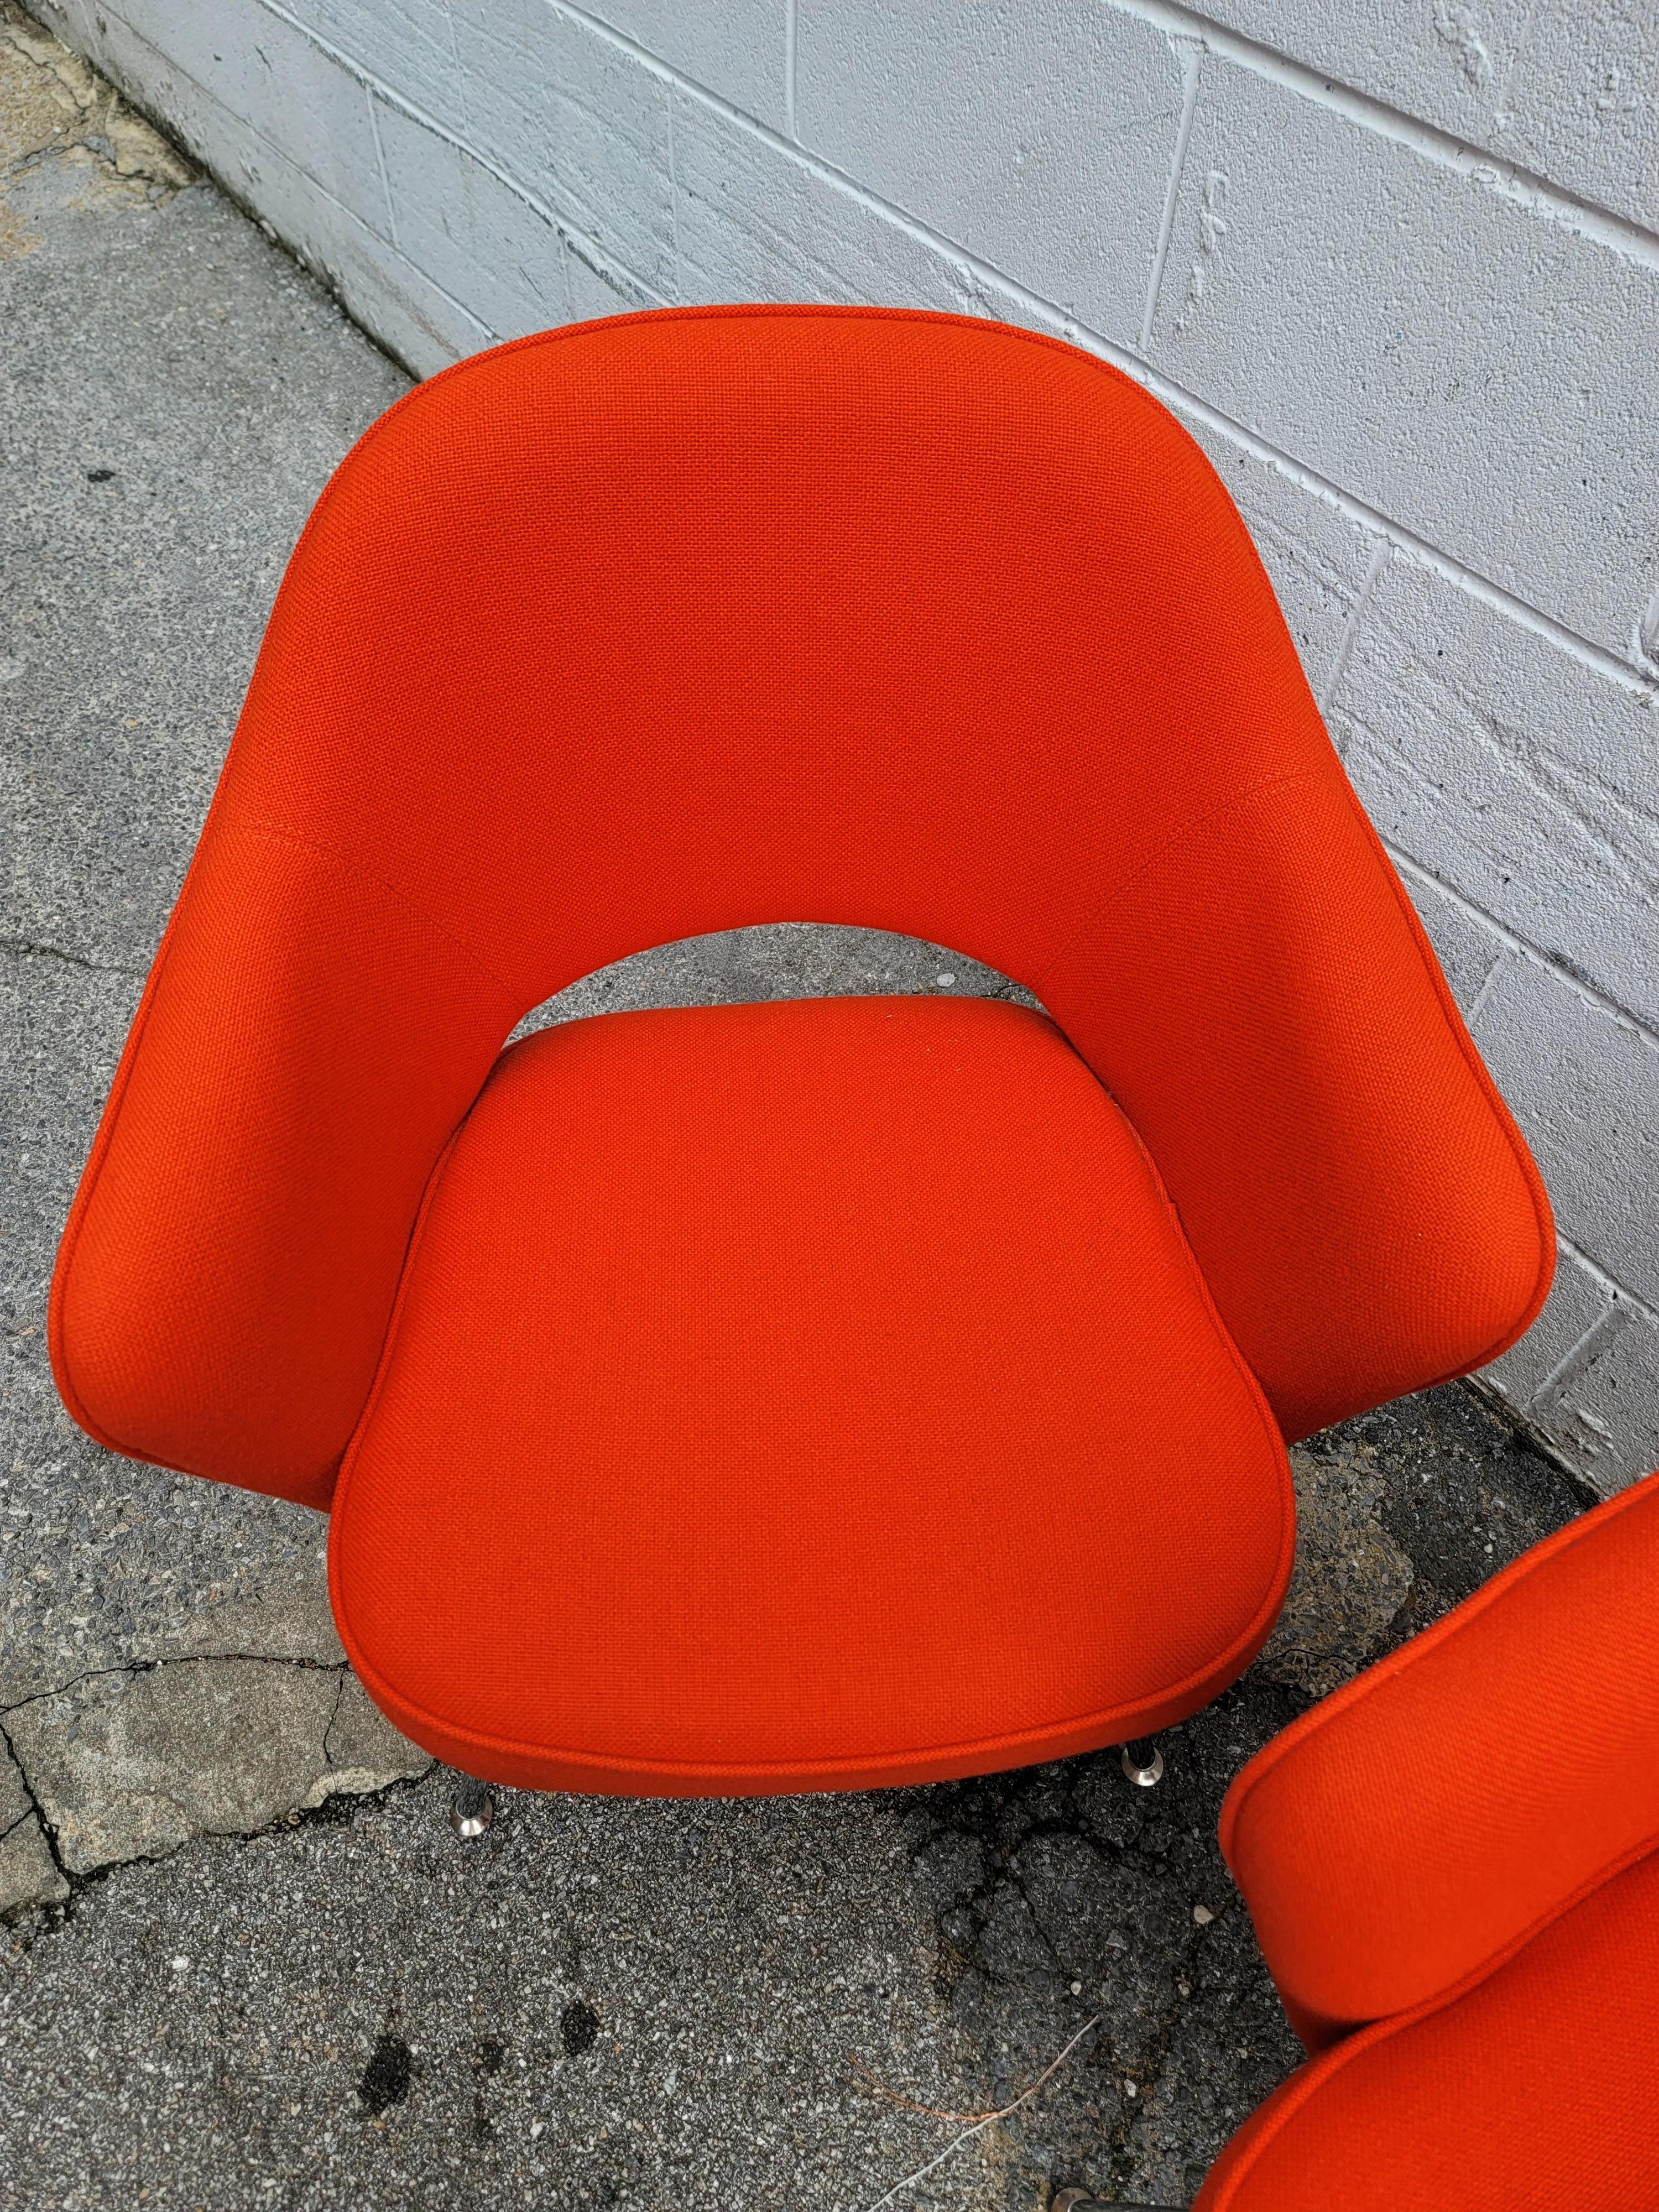 Pair of executive arm chairs designed by Eero Saarinen for Knoll. The orange fabric is in very good condition with nice foam and clean, shiny chrome legs. Labeled Knoll.